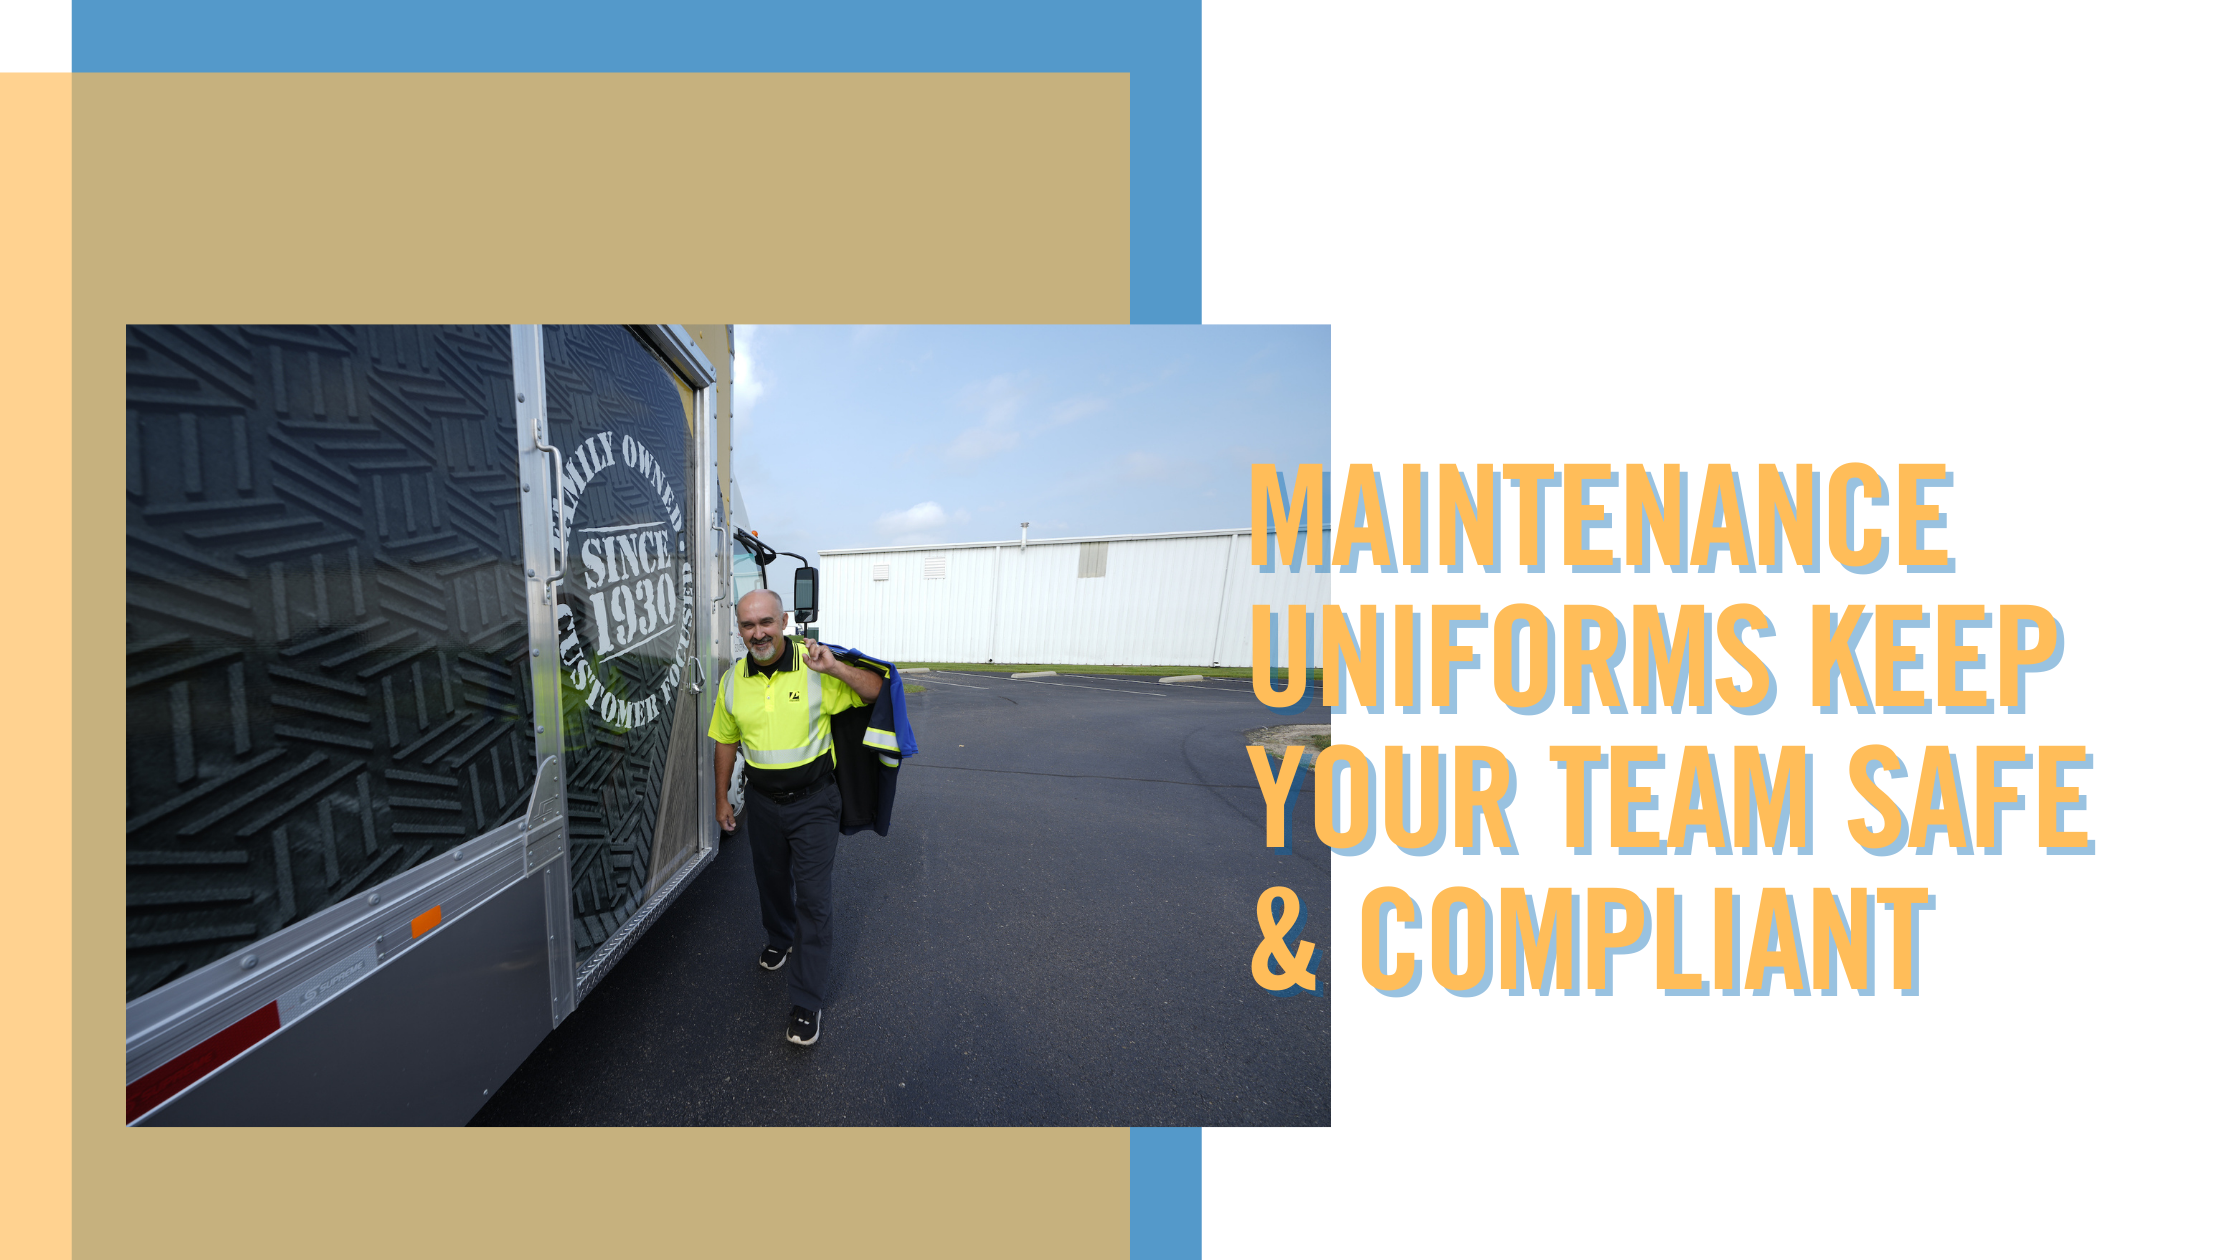 Maintenance Uniforms Keep Your Team Safe and Compliant